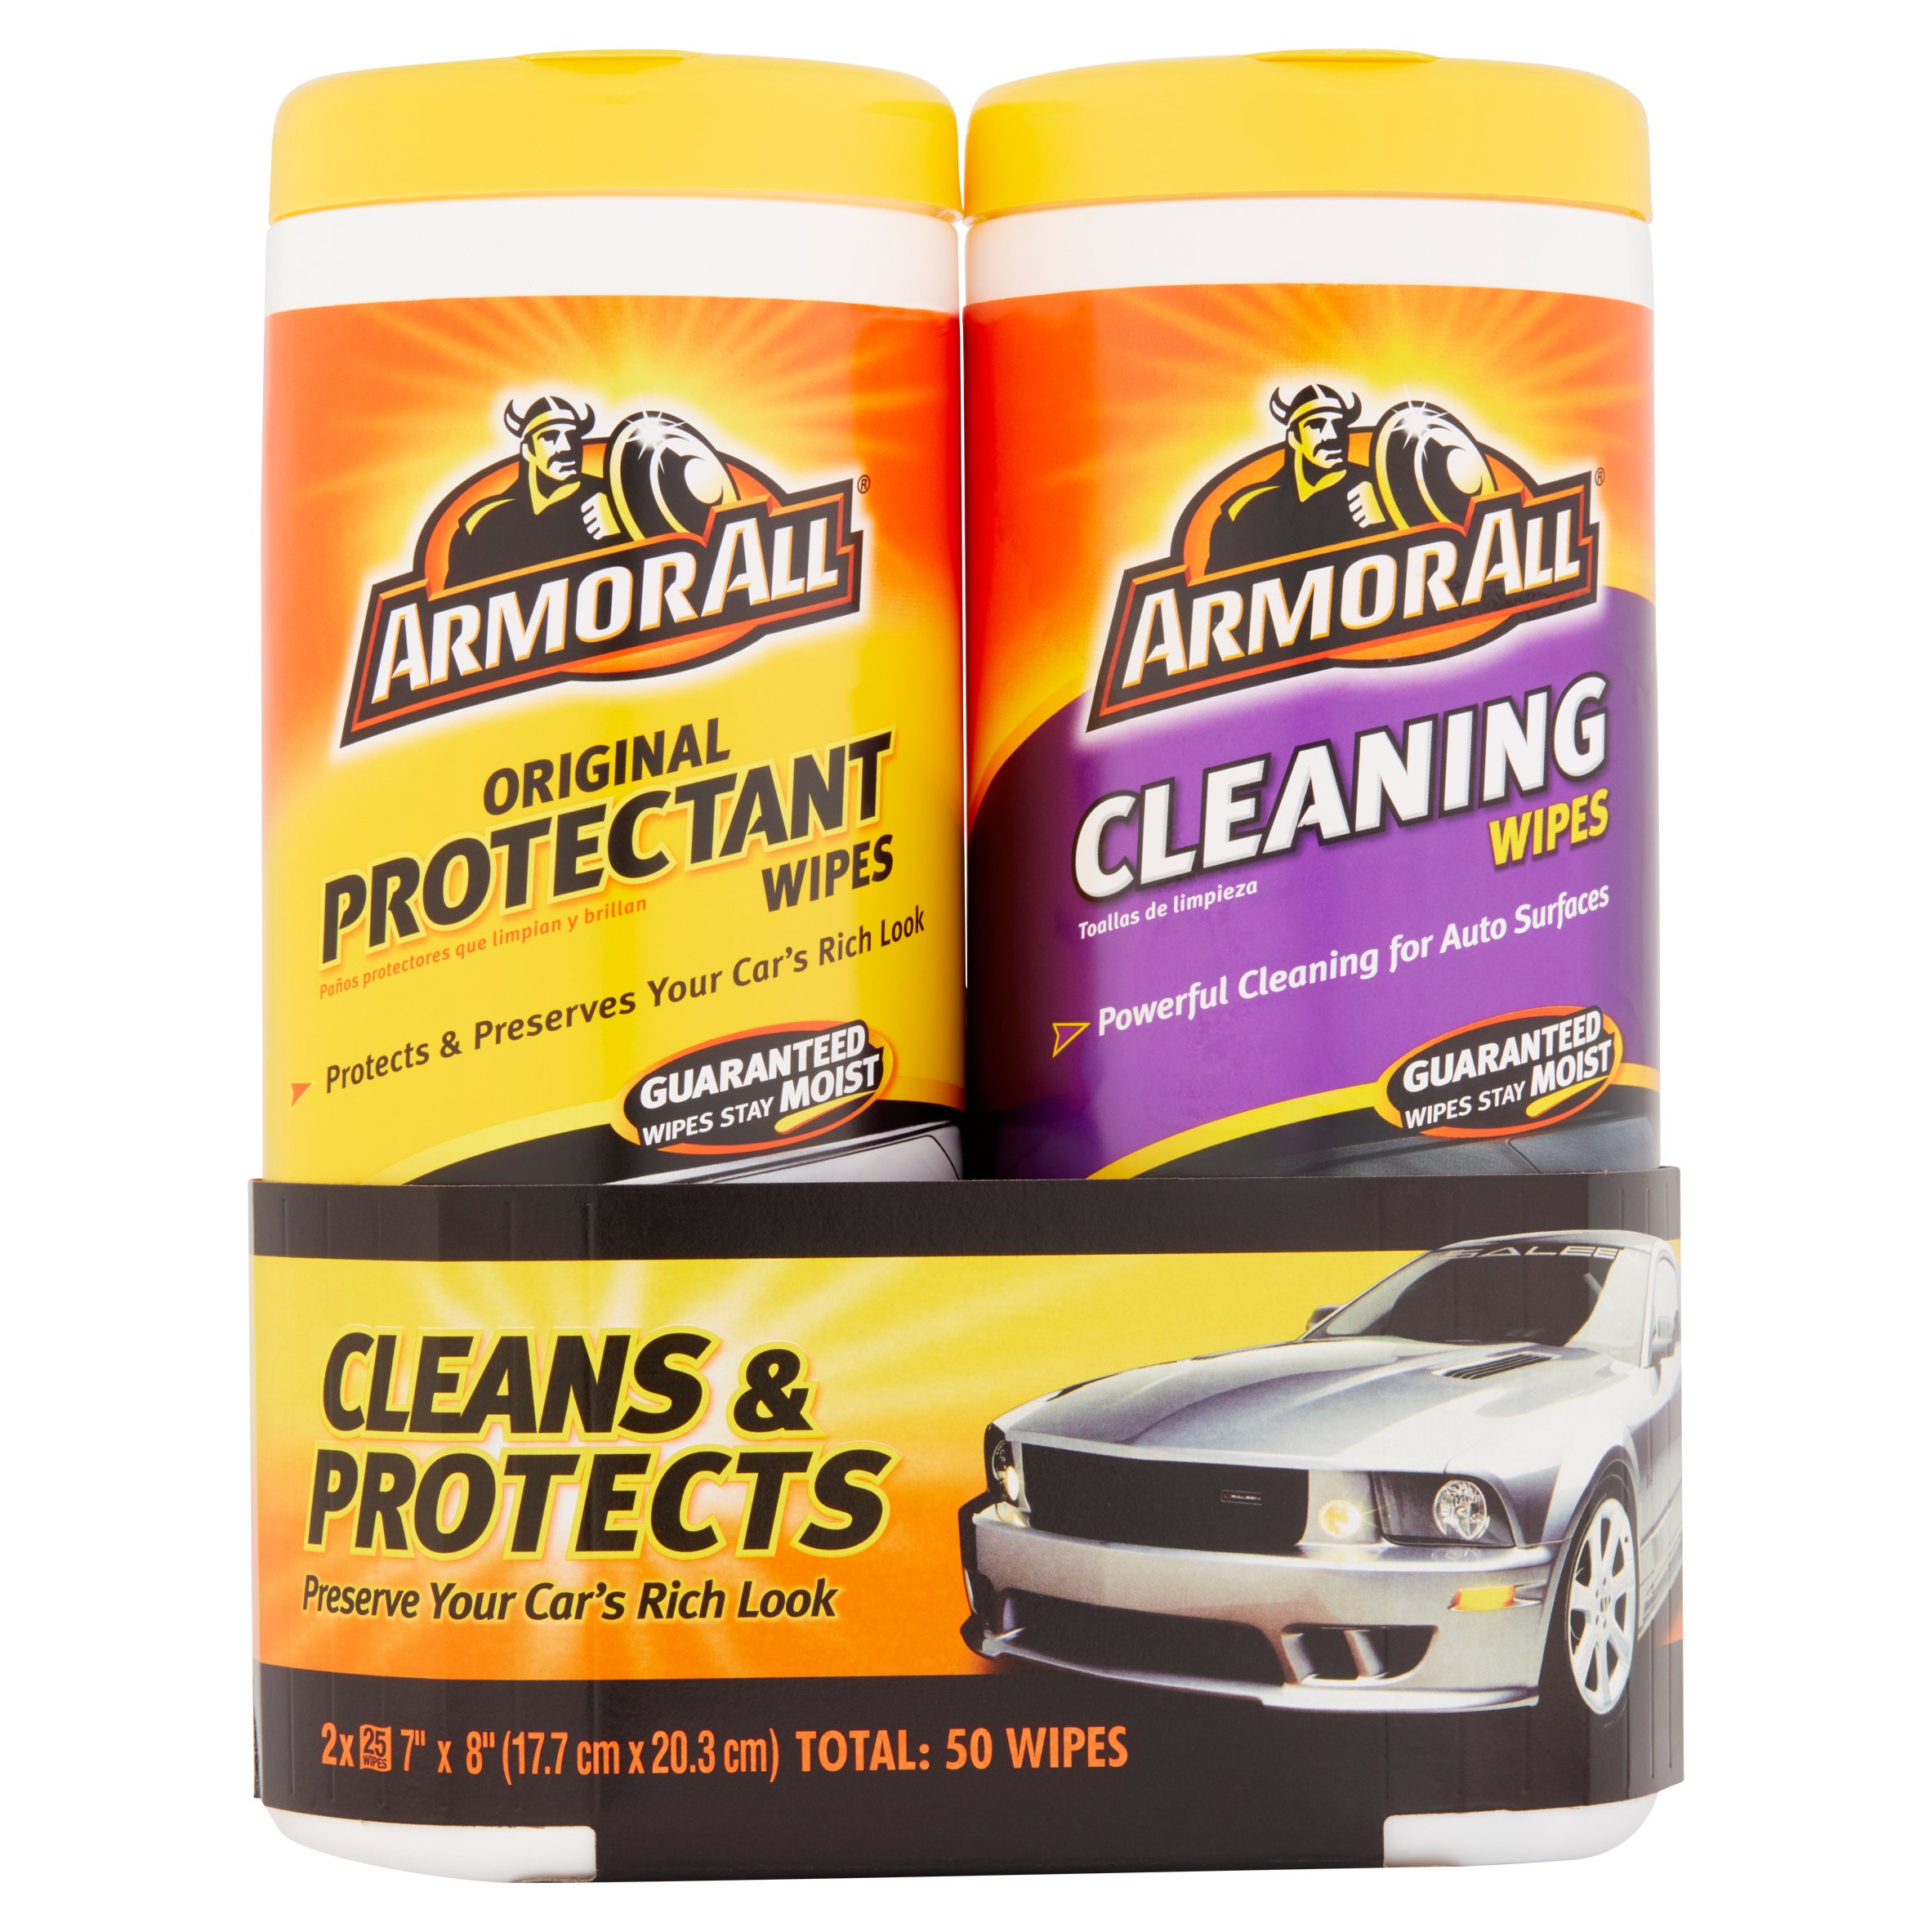 Armor All Original Protectant & Cleaning Wipes Twin Pack (2 x 25 count) - image 1 of 6